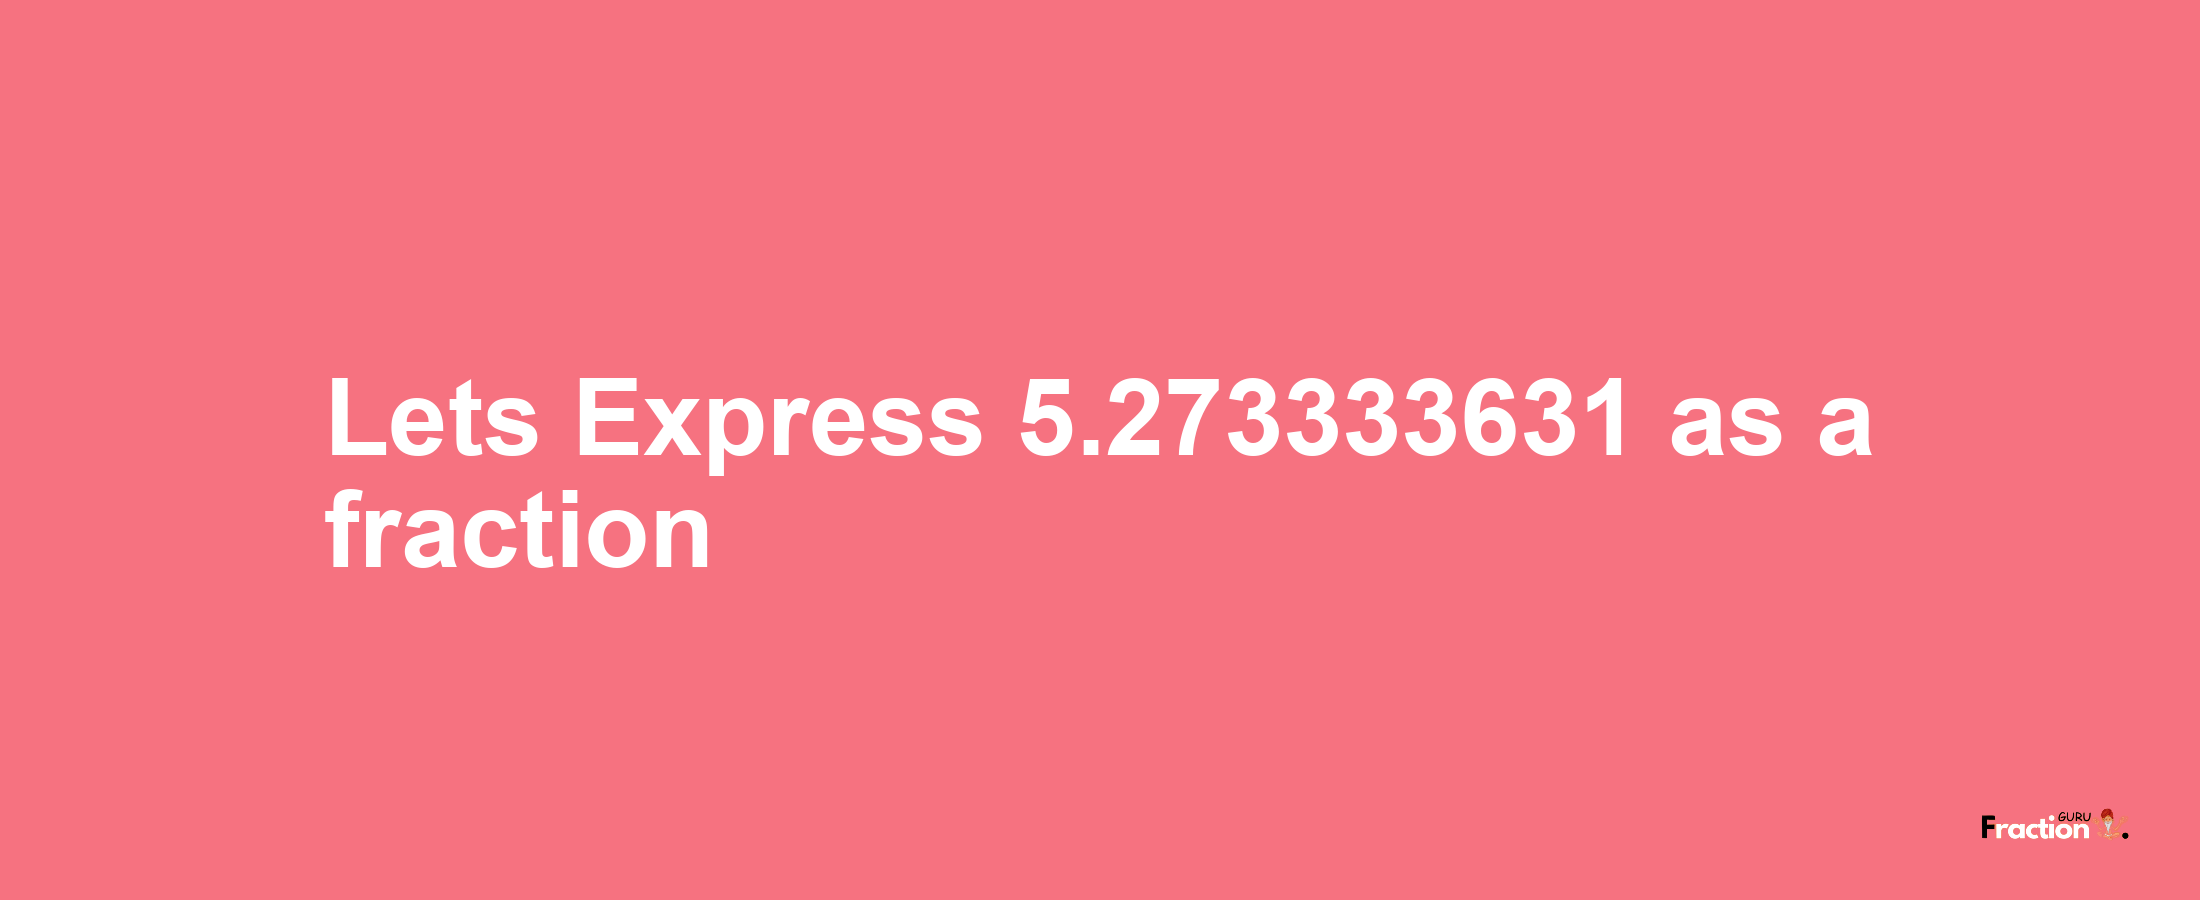 Lets Express 5.273333631 as afraction